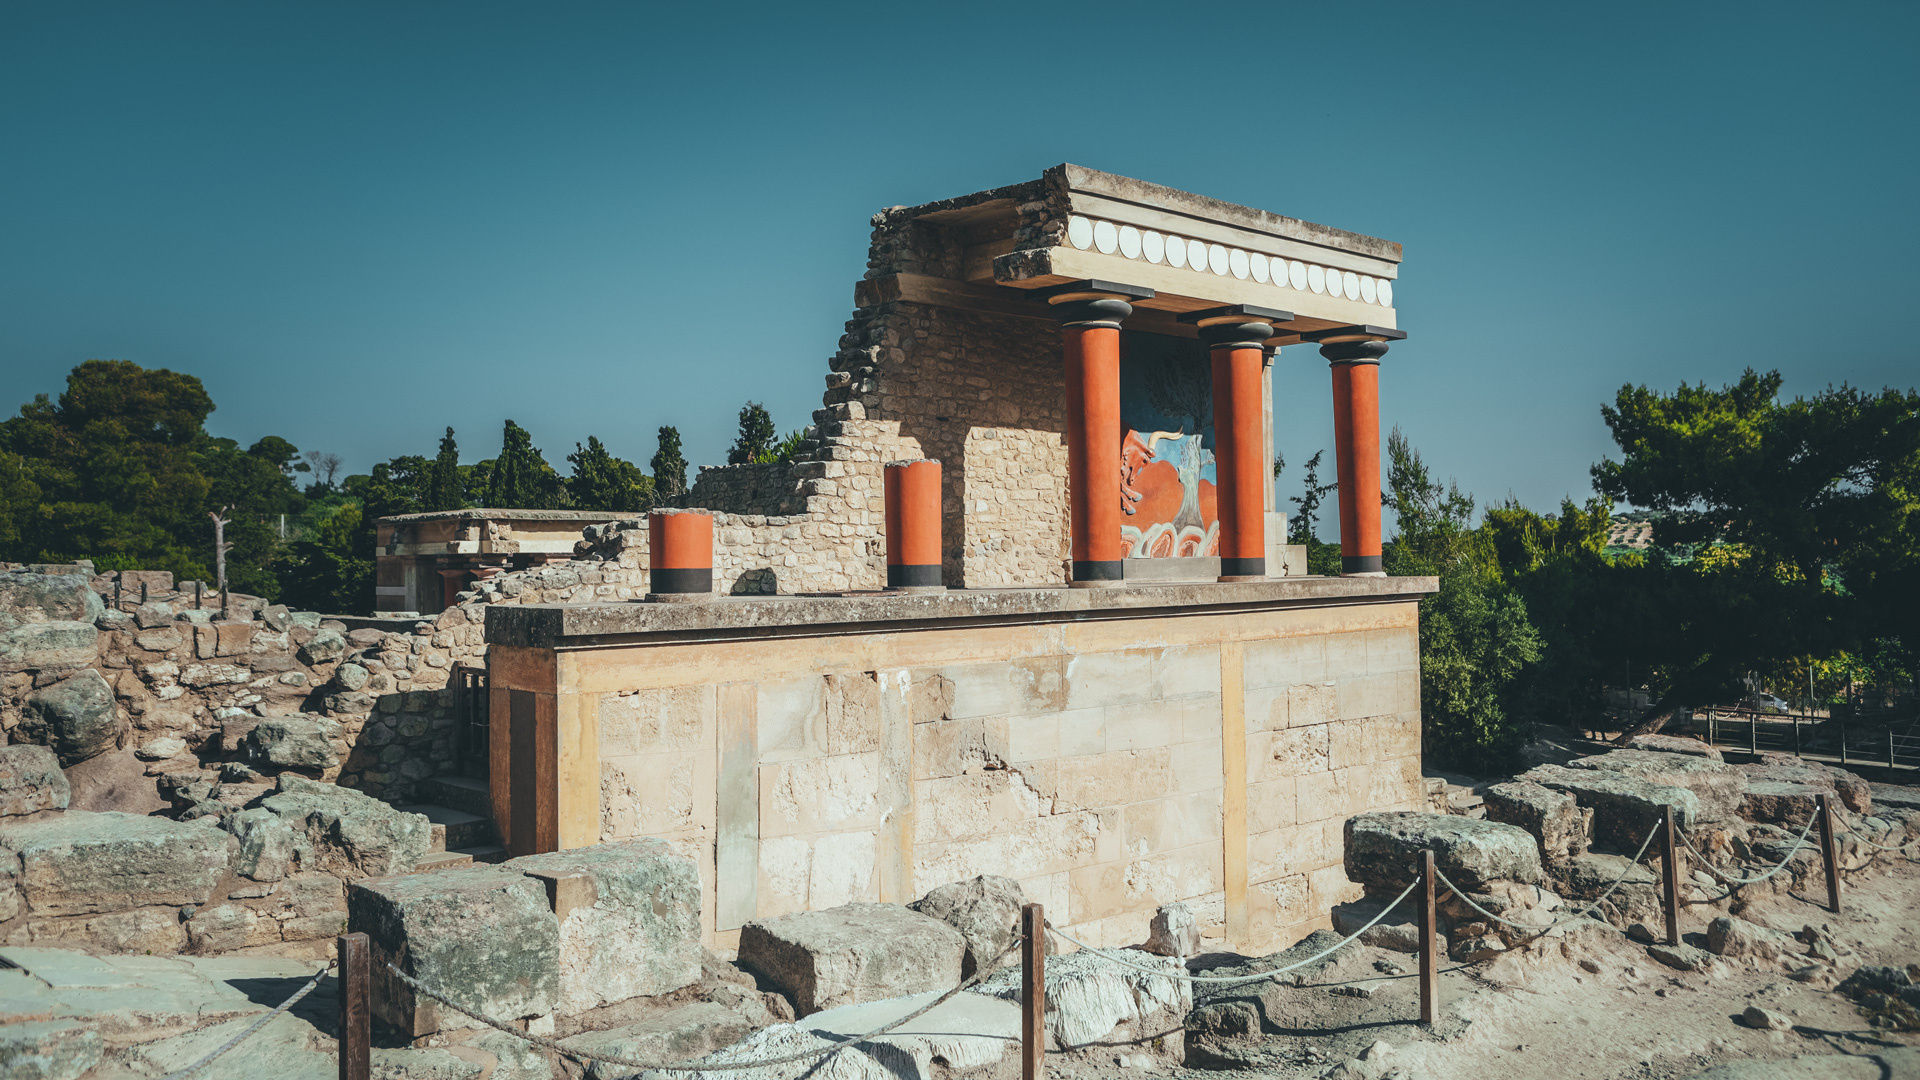 Knossos Palace, Guided tour, Crete's highlight, Greek heritage, 1920x1080 Full HD Desktop